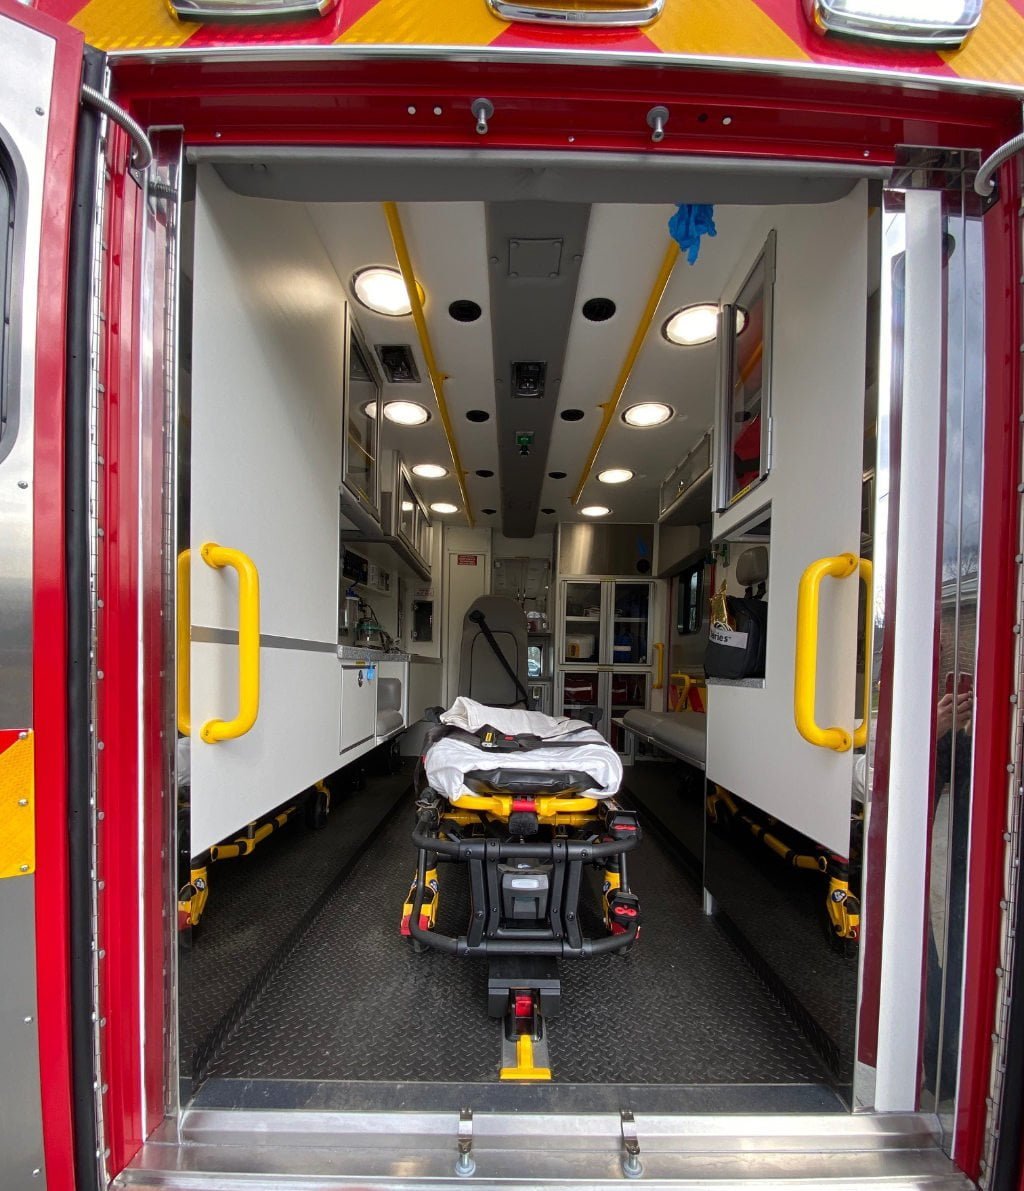 Inside the patient module, the new Bethel-Tate ambulance has a Striker Power-Load and Power-Pro XT cot.